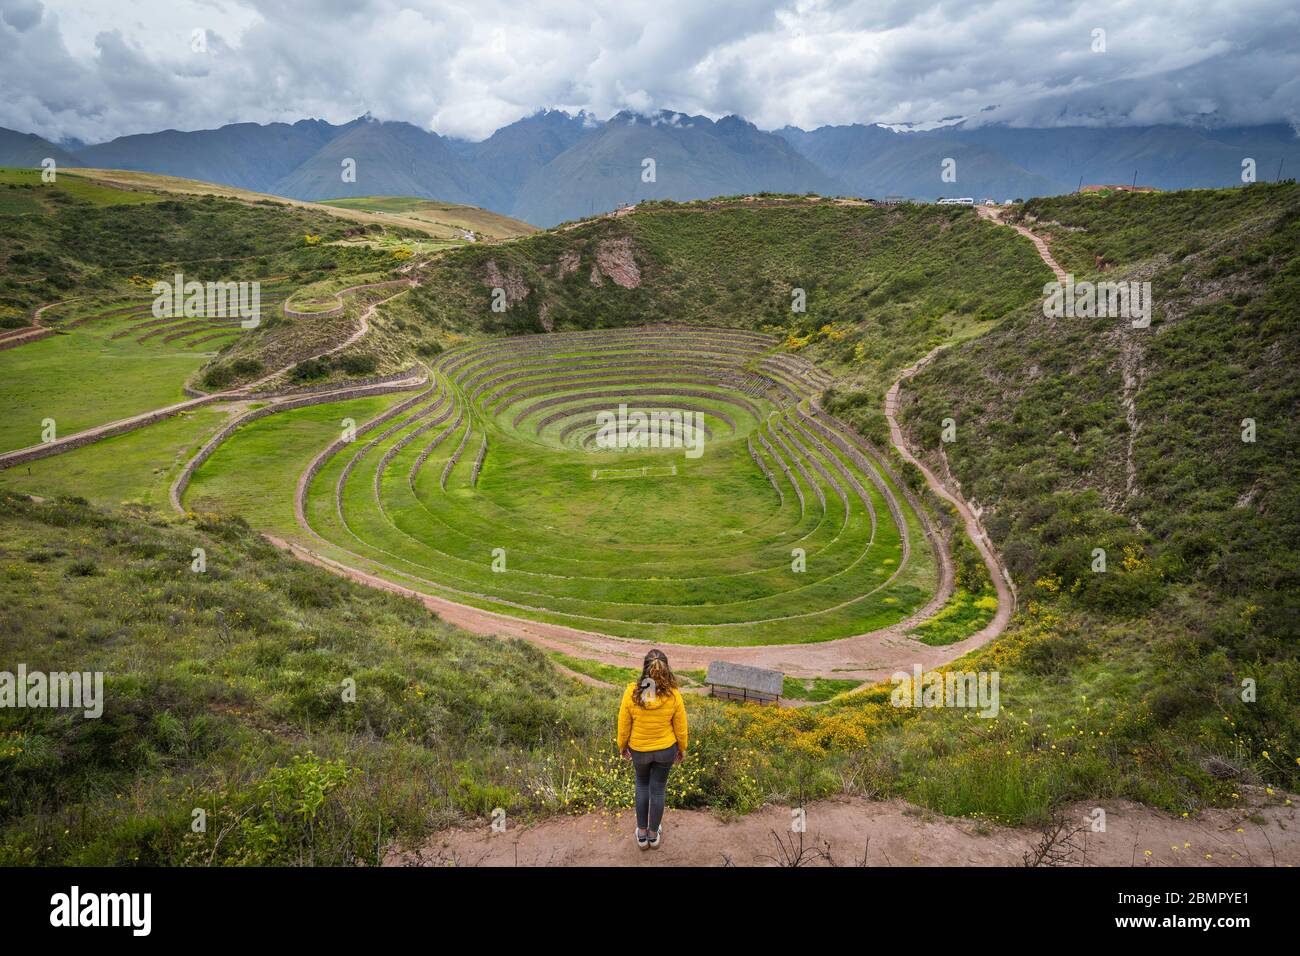 Female traveler exploring the Inca terraces of Moray, an archaeological site in the Sacred Valley, Cusco Region, Peru, South America. Stock Photo